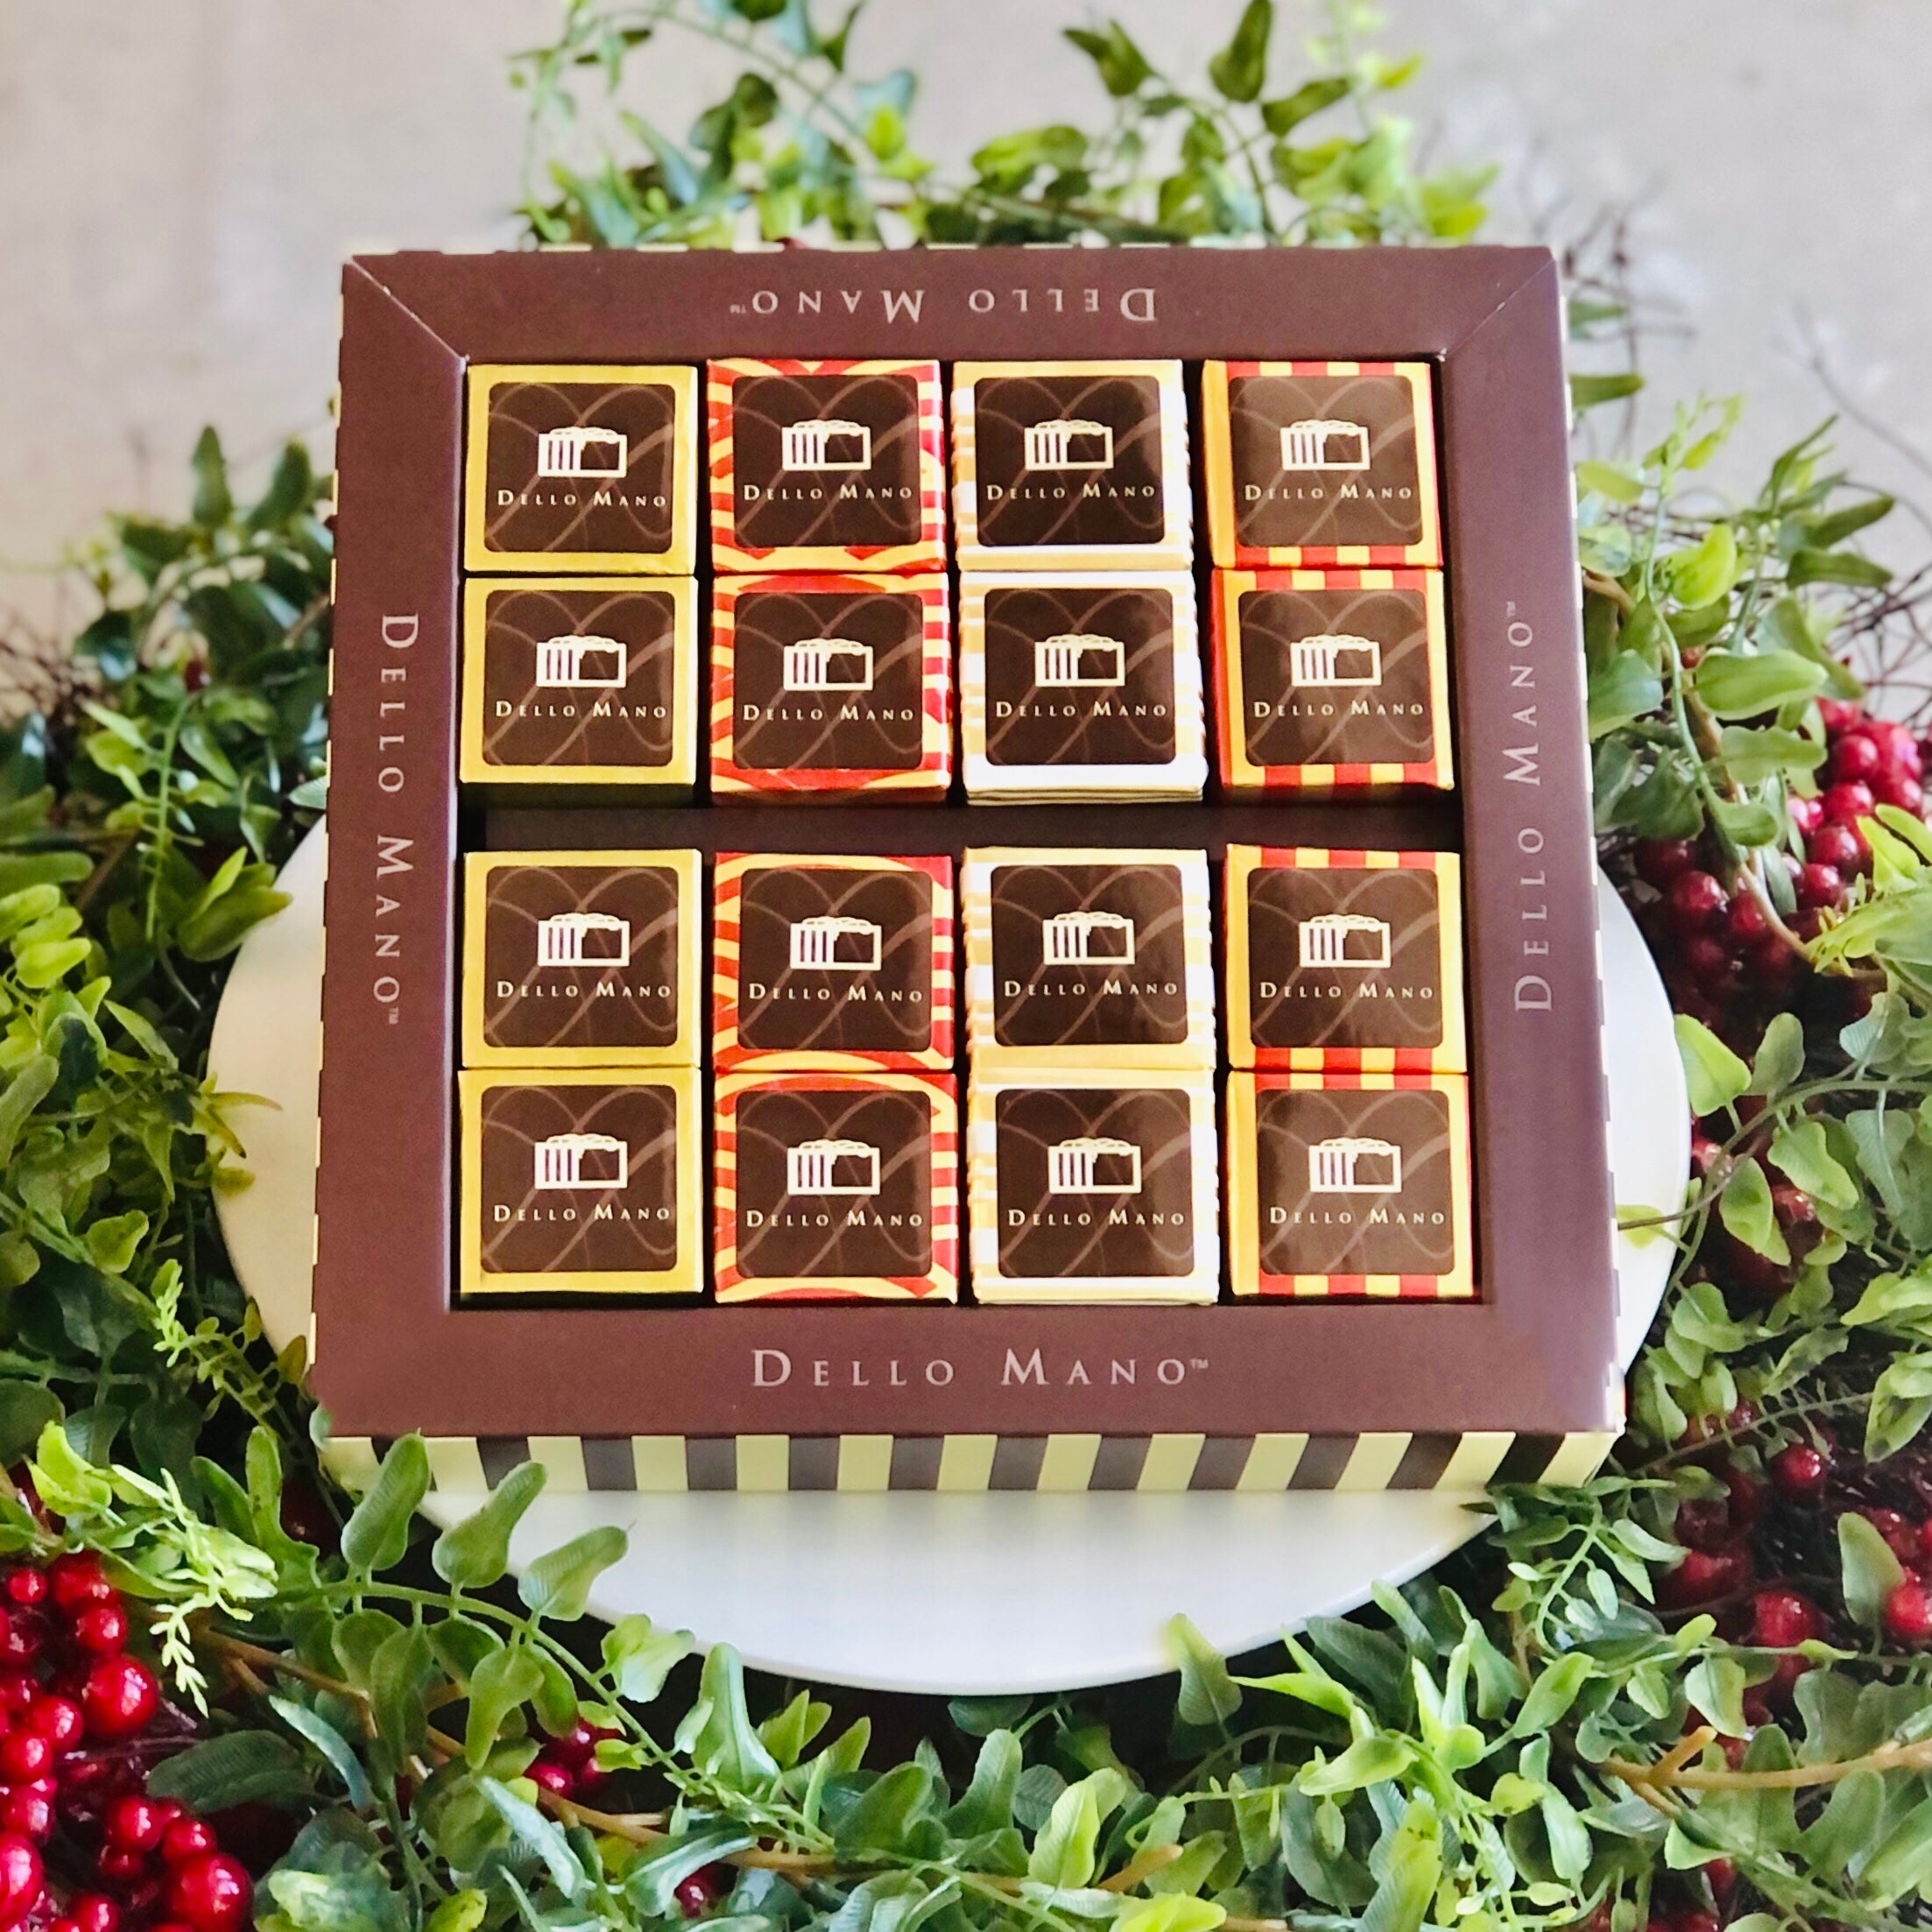 A Christmas Brownie sampler gift box filled with 16 foil covered brownies. The box says Dello Mano with words and is surrounded by greenery and red berries